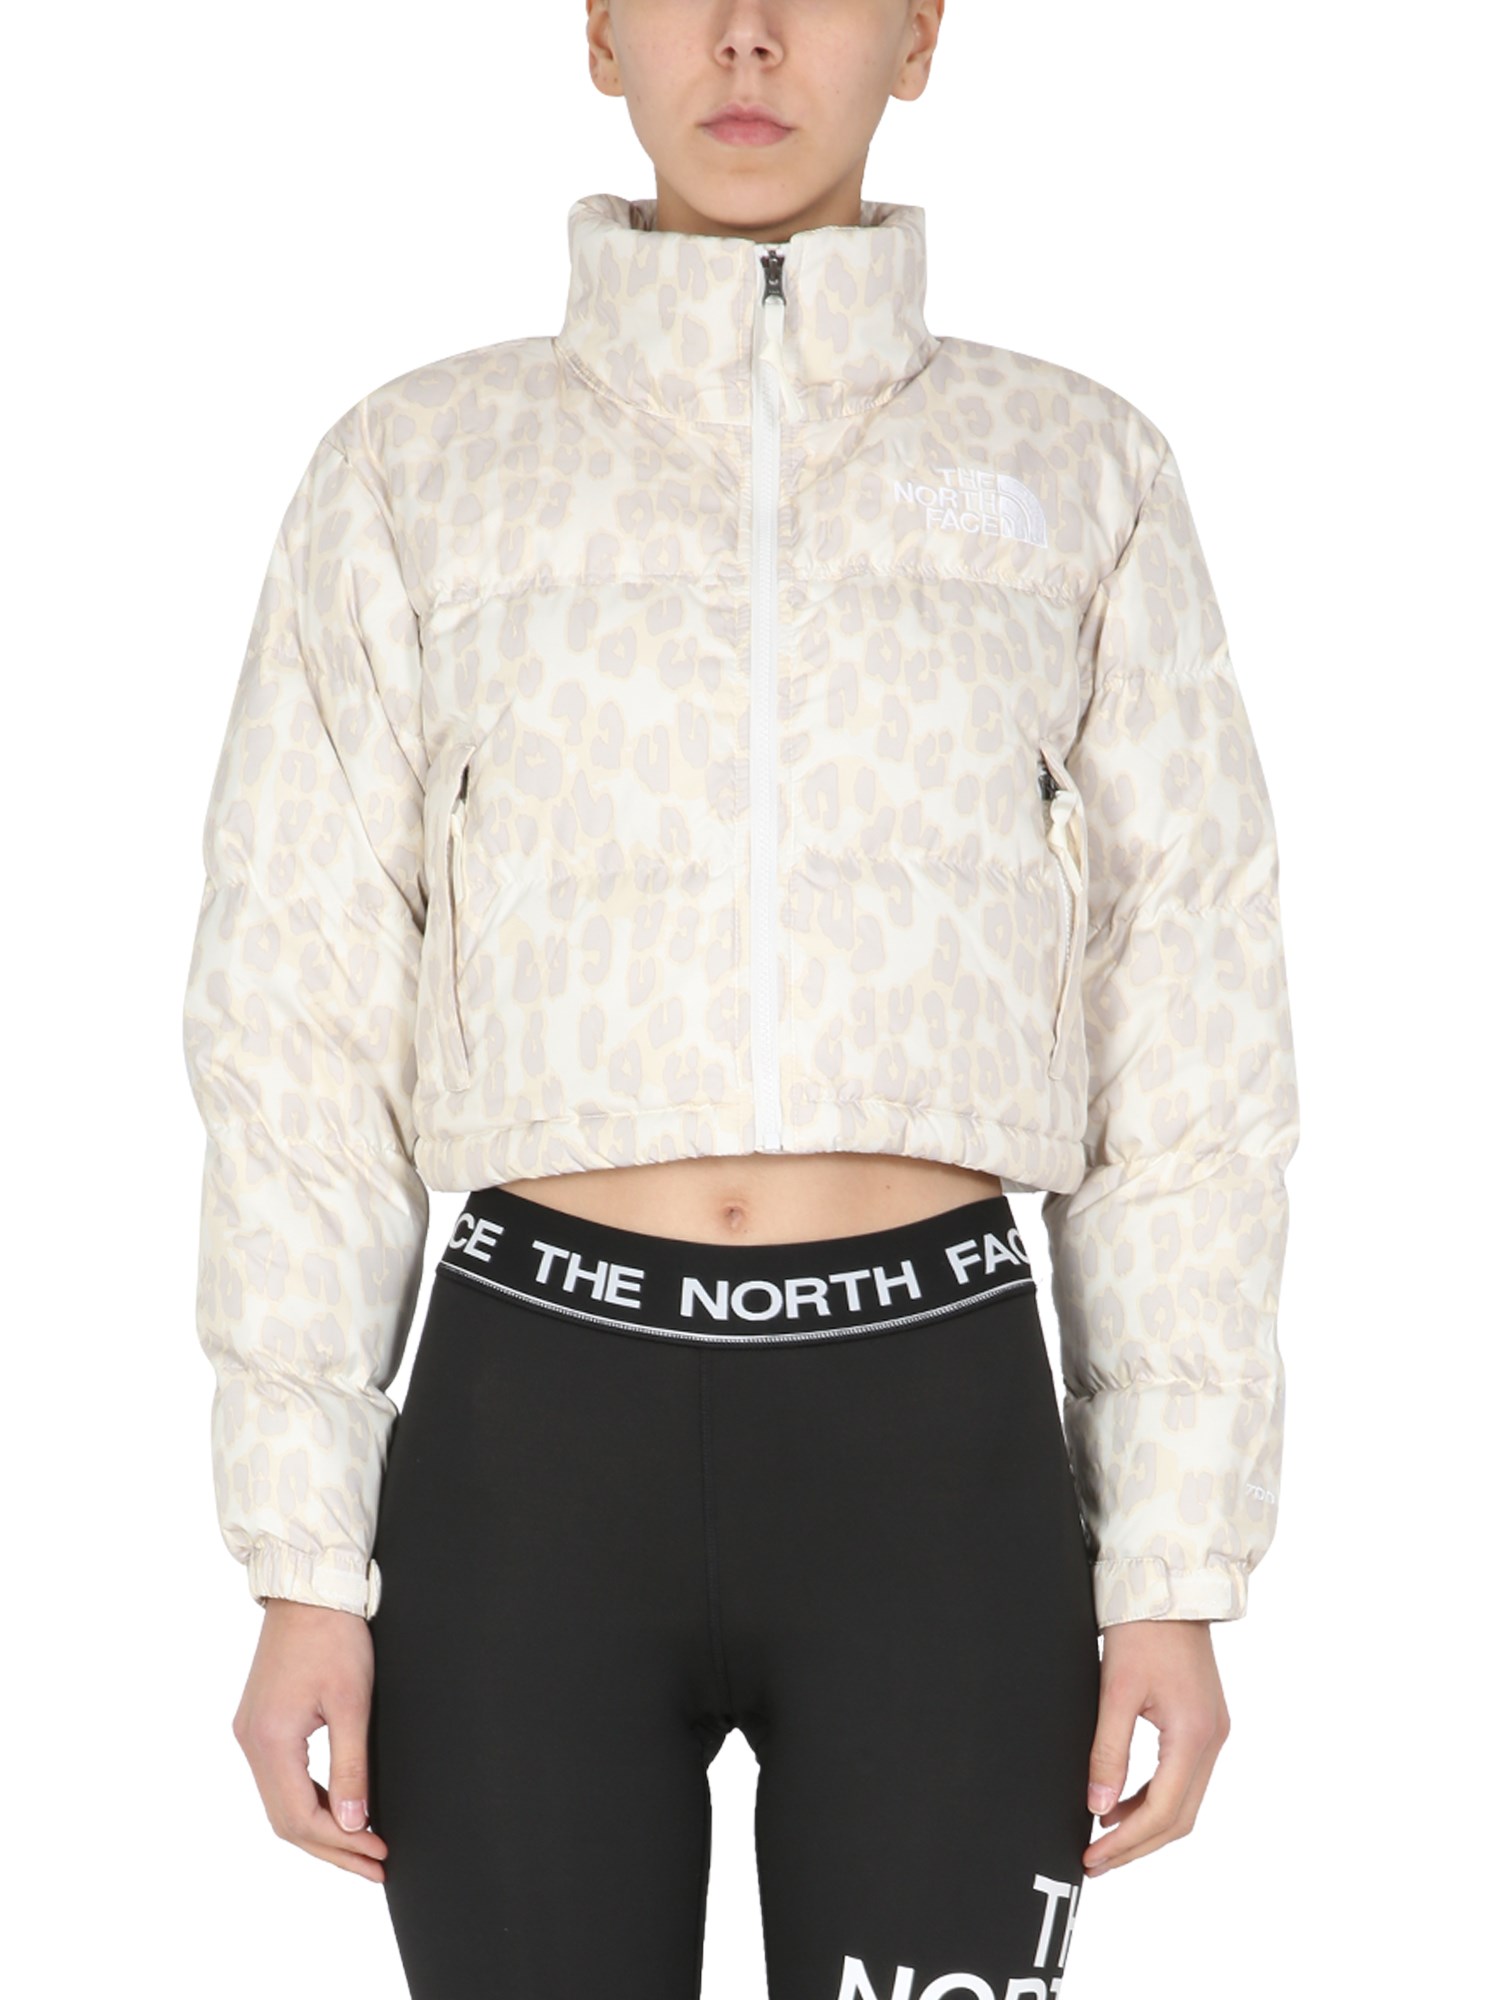 the north face giacca con stampa maculata